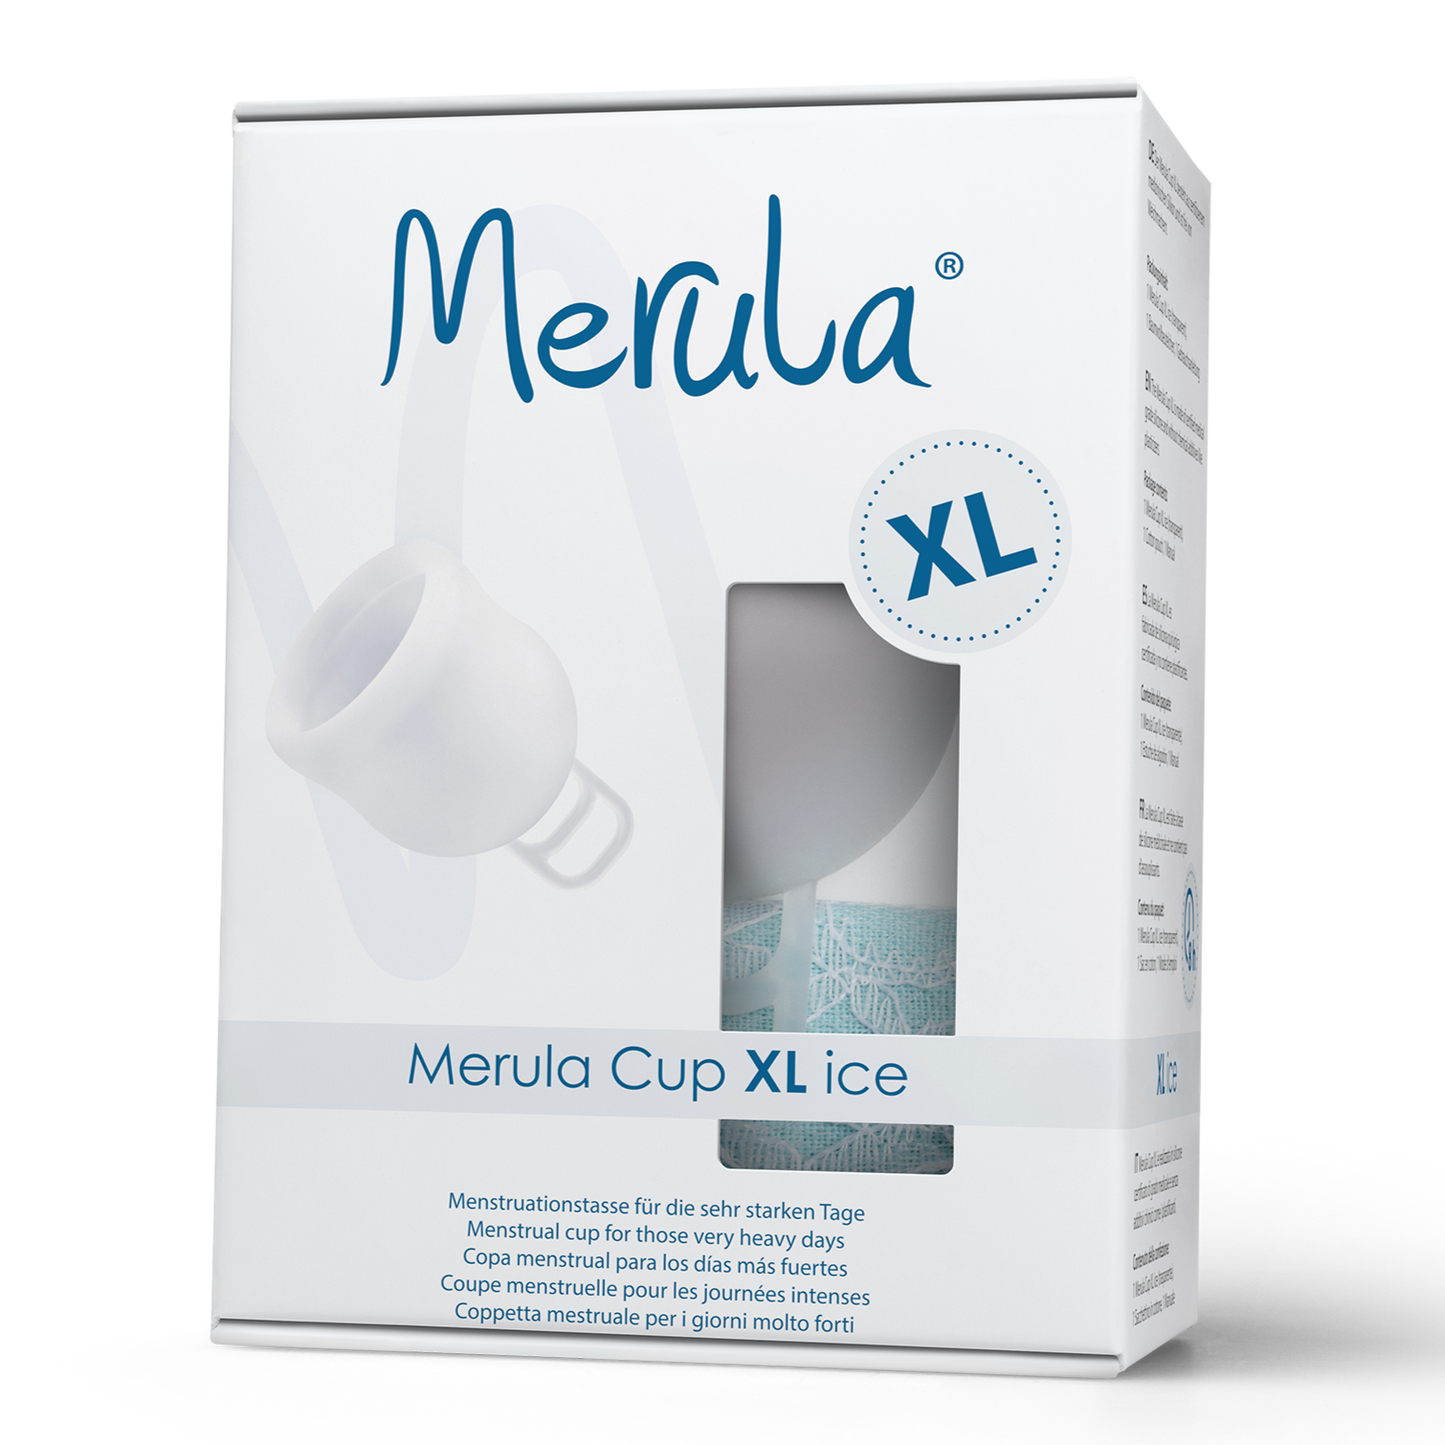 Merula XL in ice clear menstrual cup for heavy periods